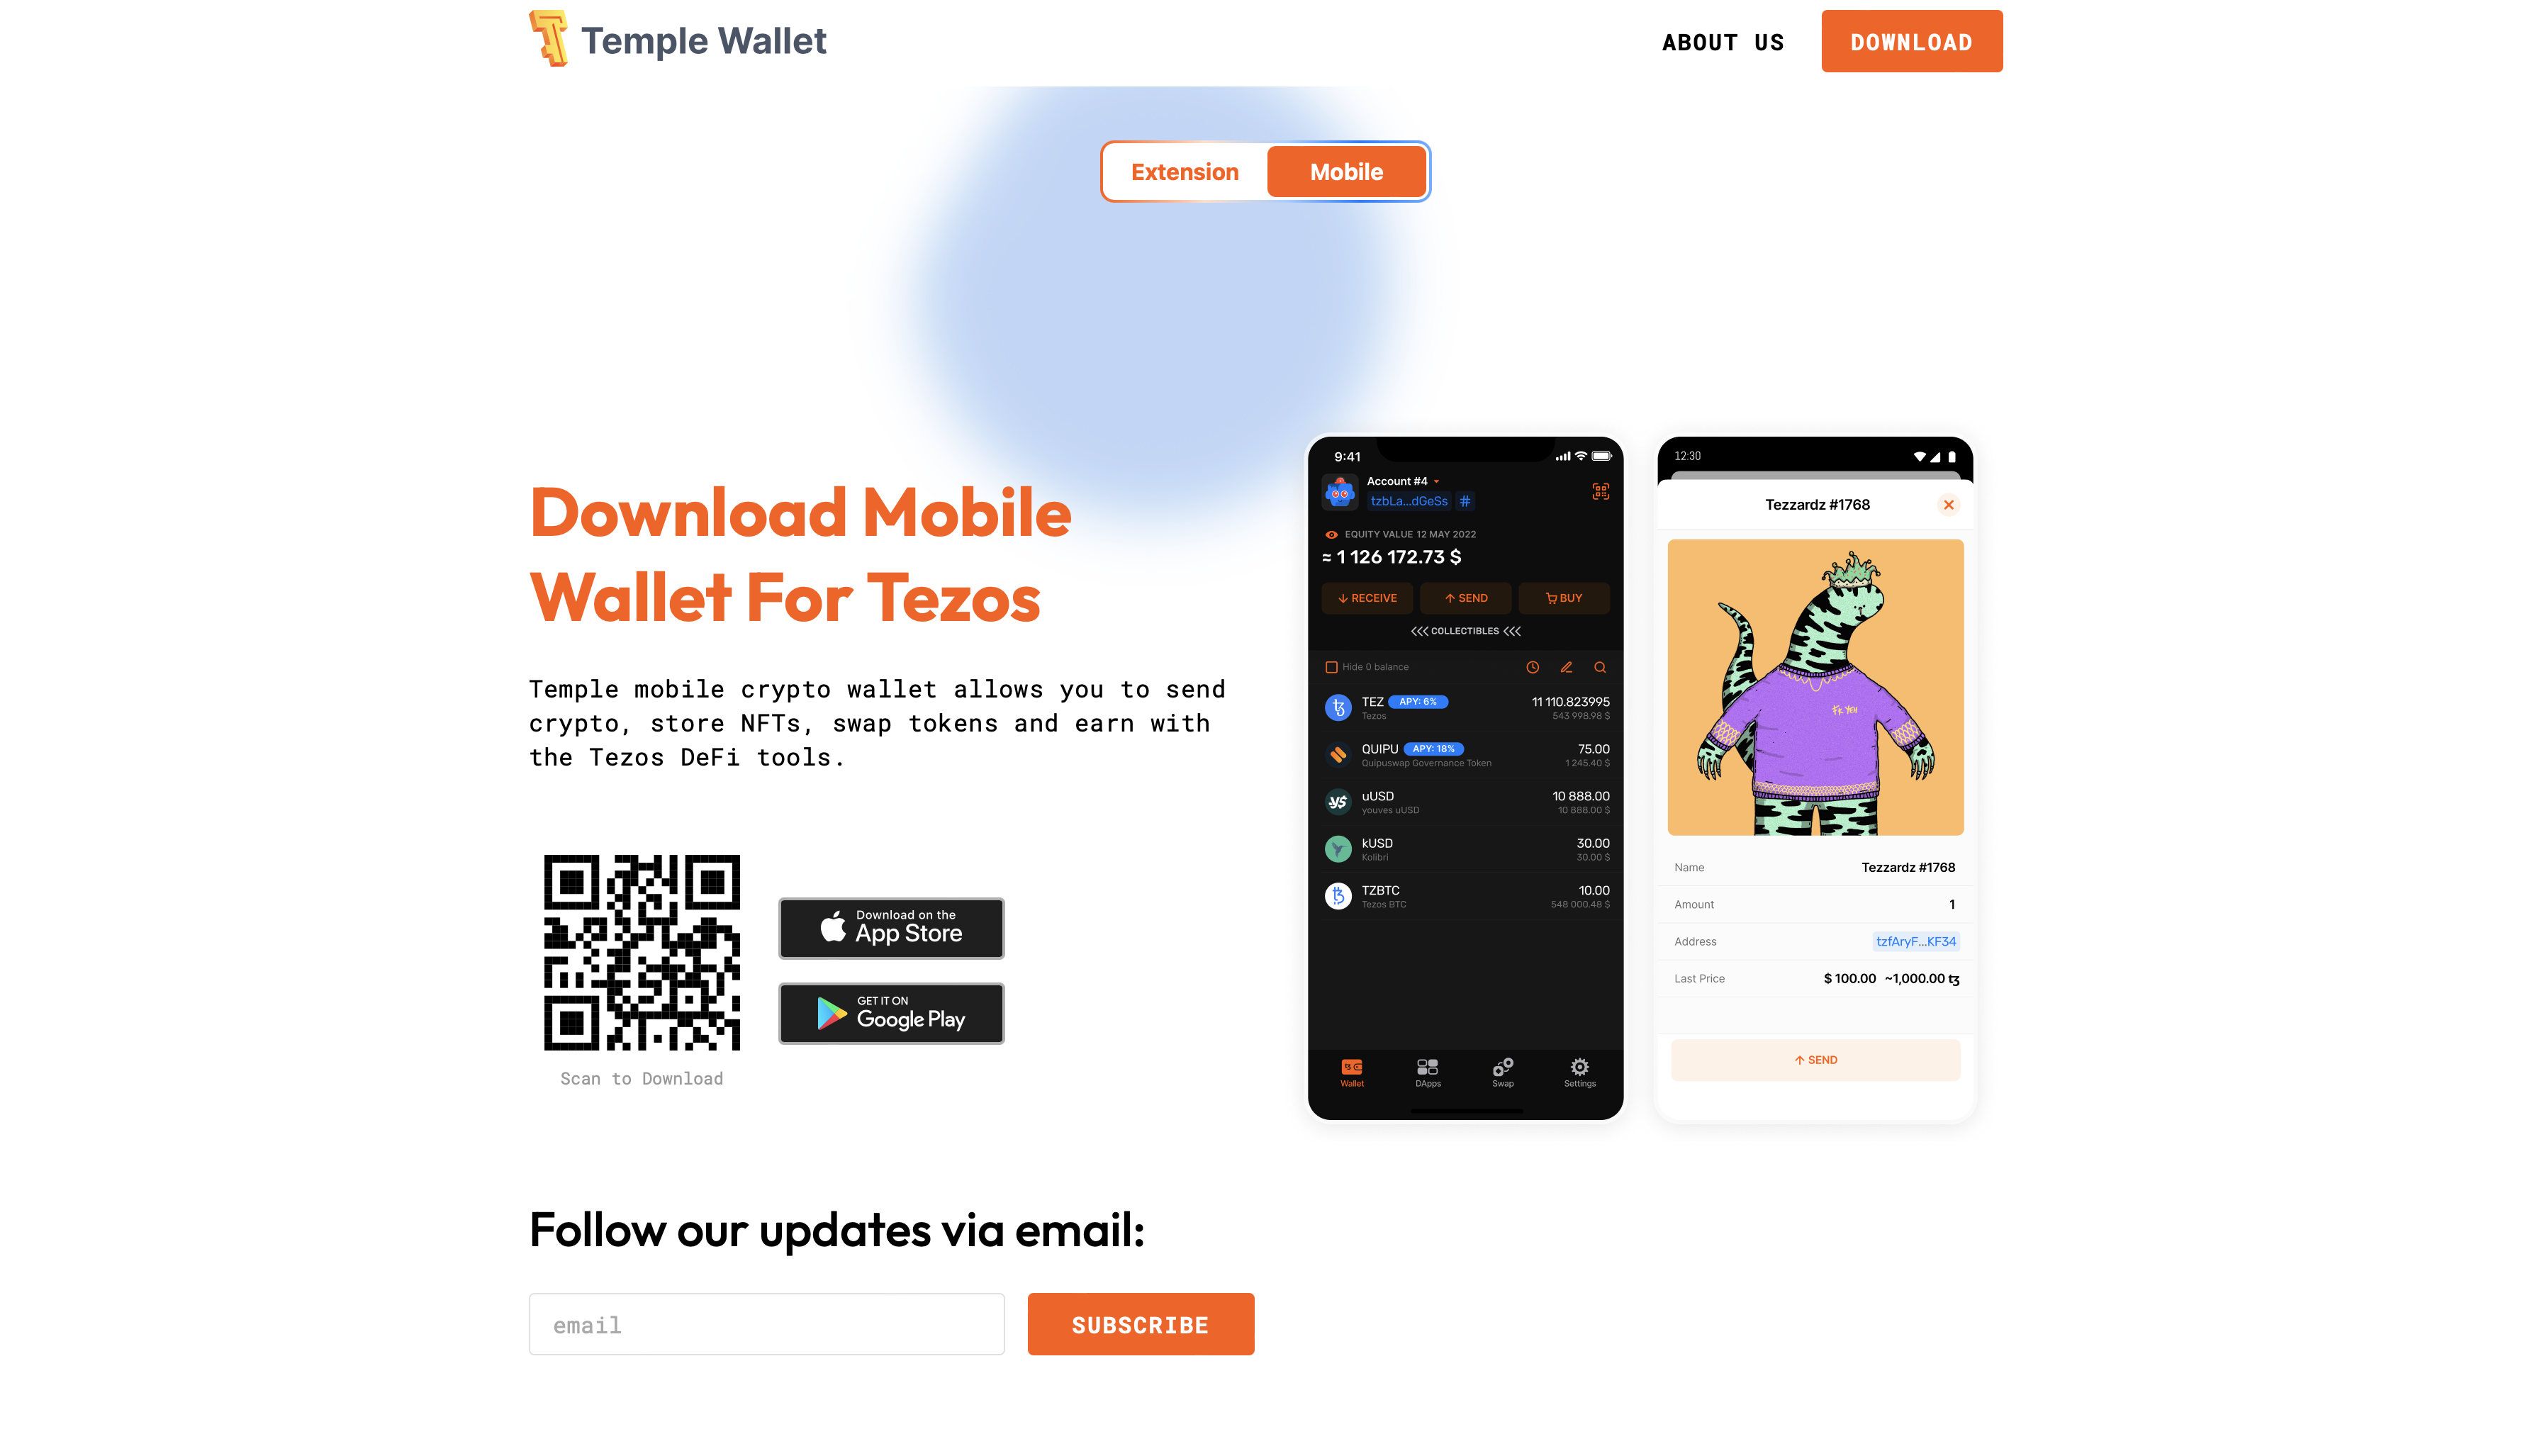 How to Download Temple Mobile Wallet